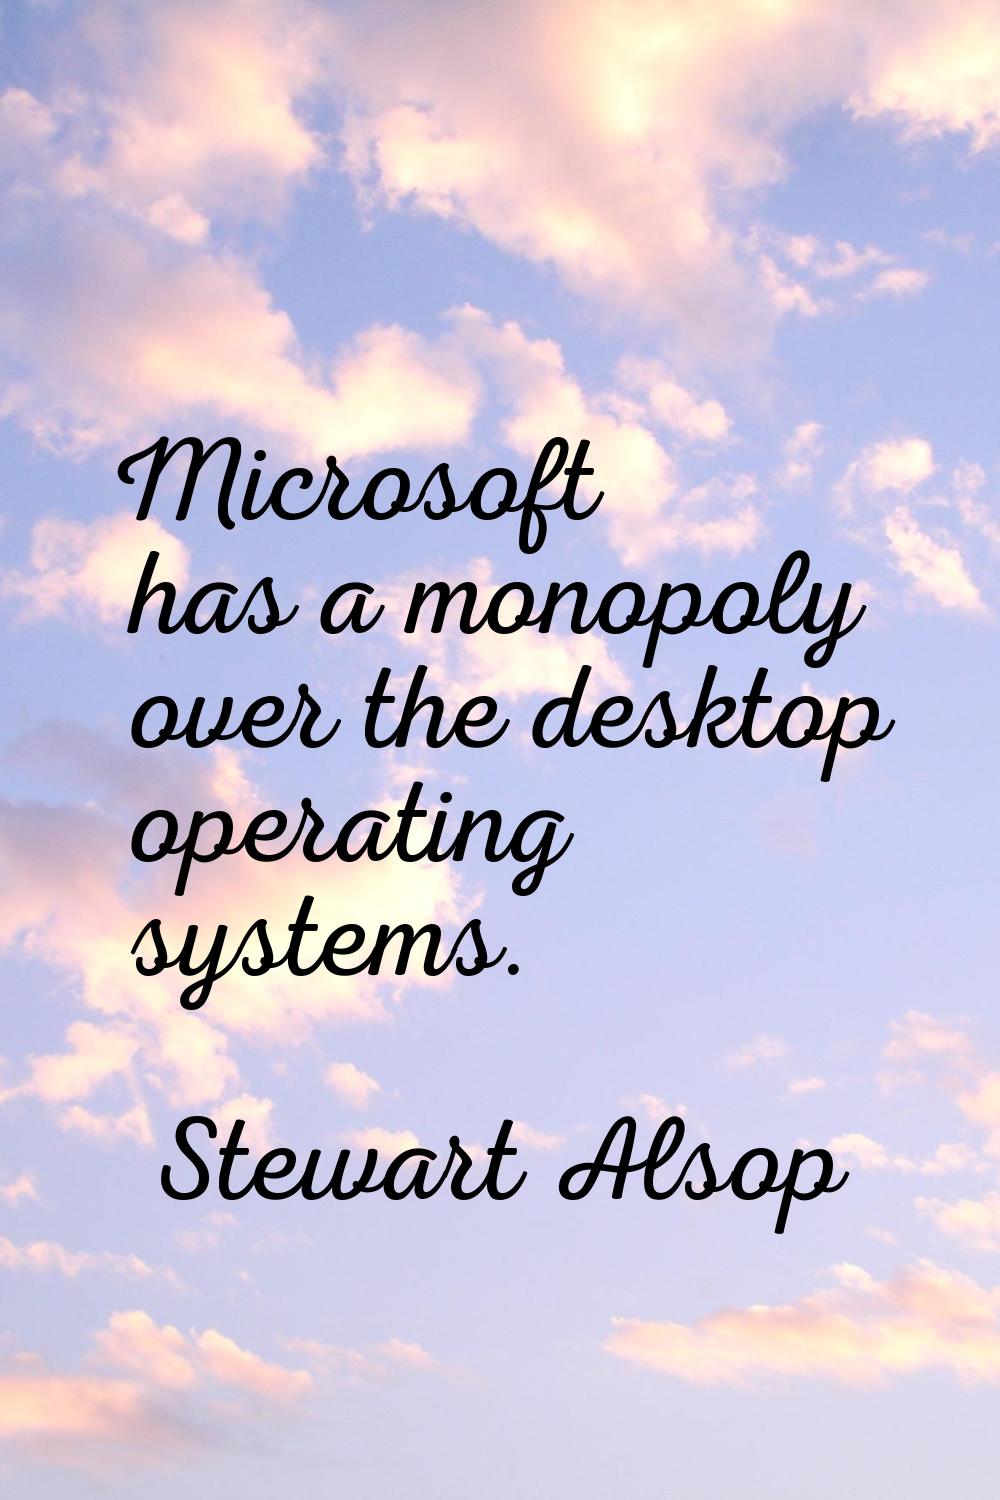 Microsoft has a monopoly over the desktop operating systems.